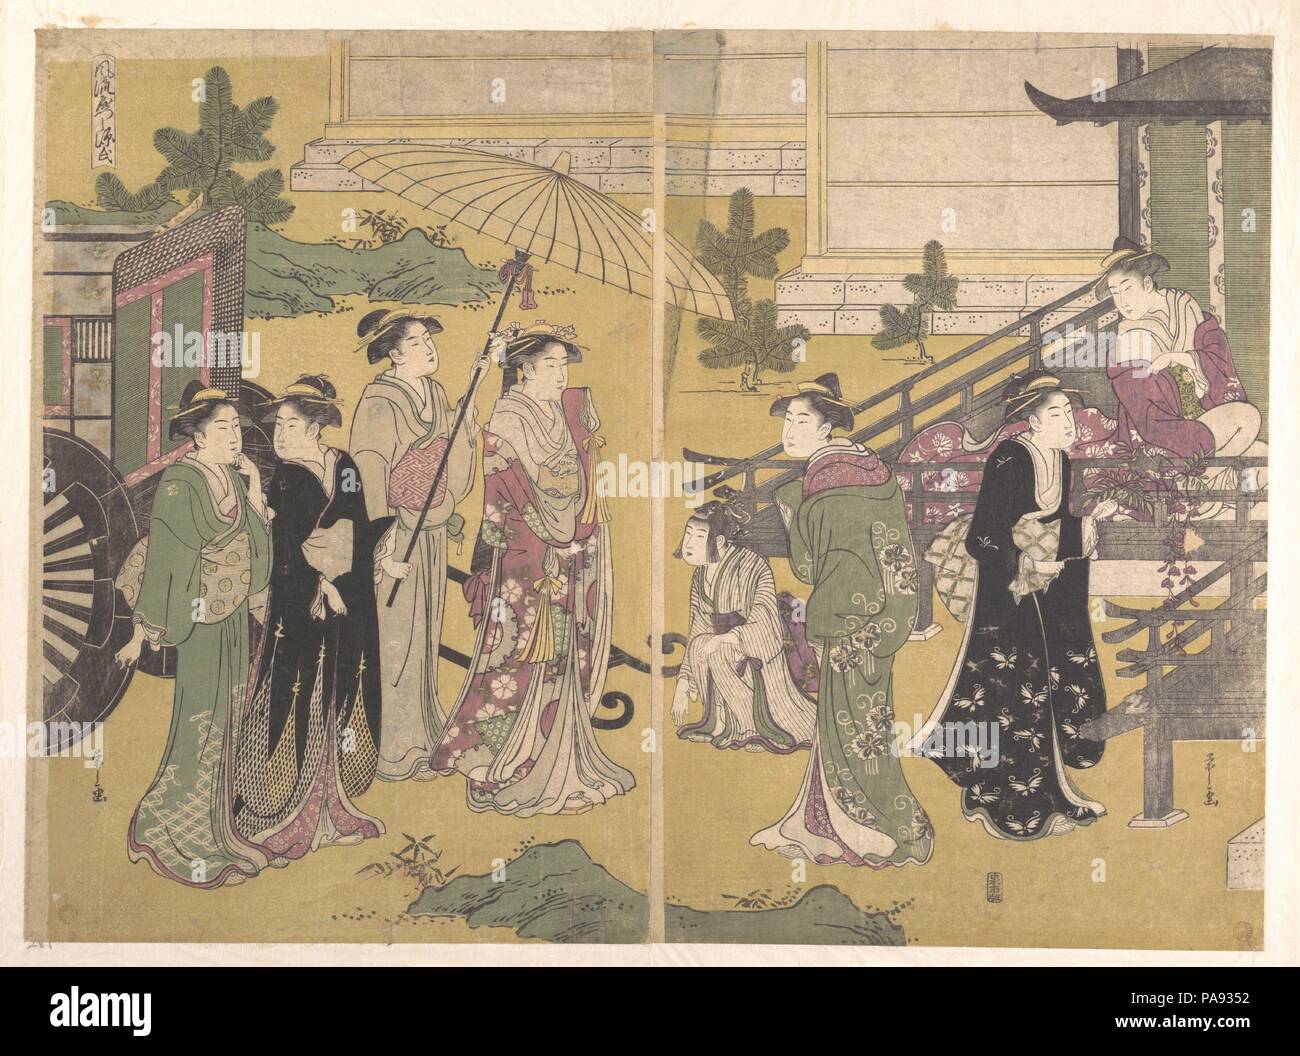 Fuji no Uraha. Artist: Chobunsai Eishi (Japanese, 1756-1829). Culture: Japan. Dimensions: 15 1/8 x 20 1/2 in. (38.4 x 52.1 cm). Date: ca. 1790.  This triptych is typical of the yatsushi, or the amusing disguise of one figure or scene as another. A gorgeous operatic pageant of beautiful ladies is presented here as one of the happiest scenes from The Tale of Genji. This is the last chapter of the first half of the Genji, which relates a series of climactic events culminating with the success of the Shining Prince, a success that is to lead rapidly to catastrophe in succeeding chapters. Here, Yug Stock Photo